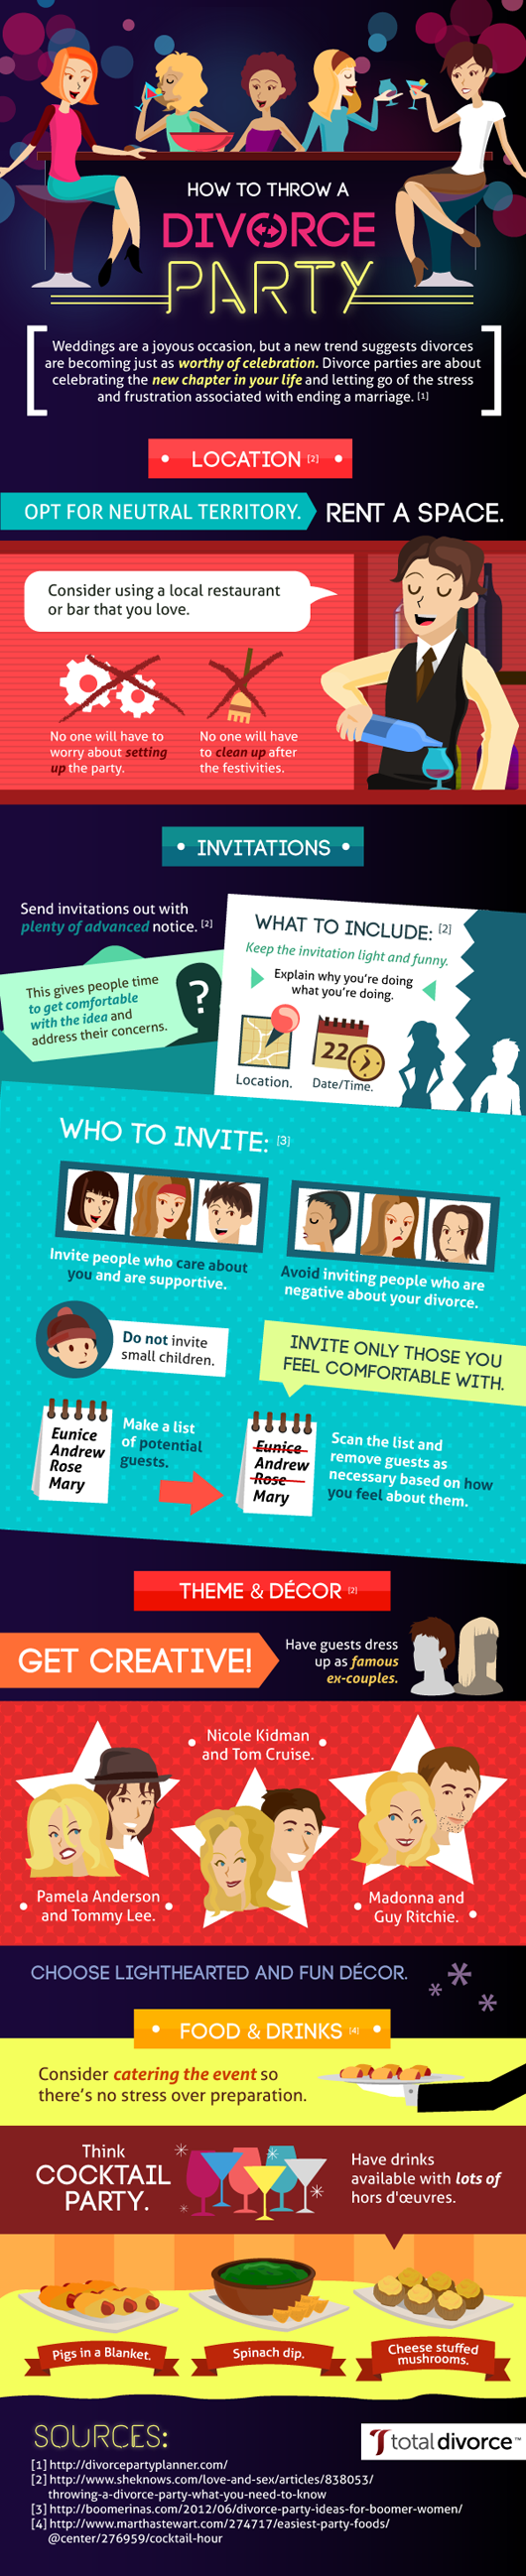 How to Throw a Divorce Party-Infographic